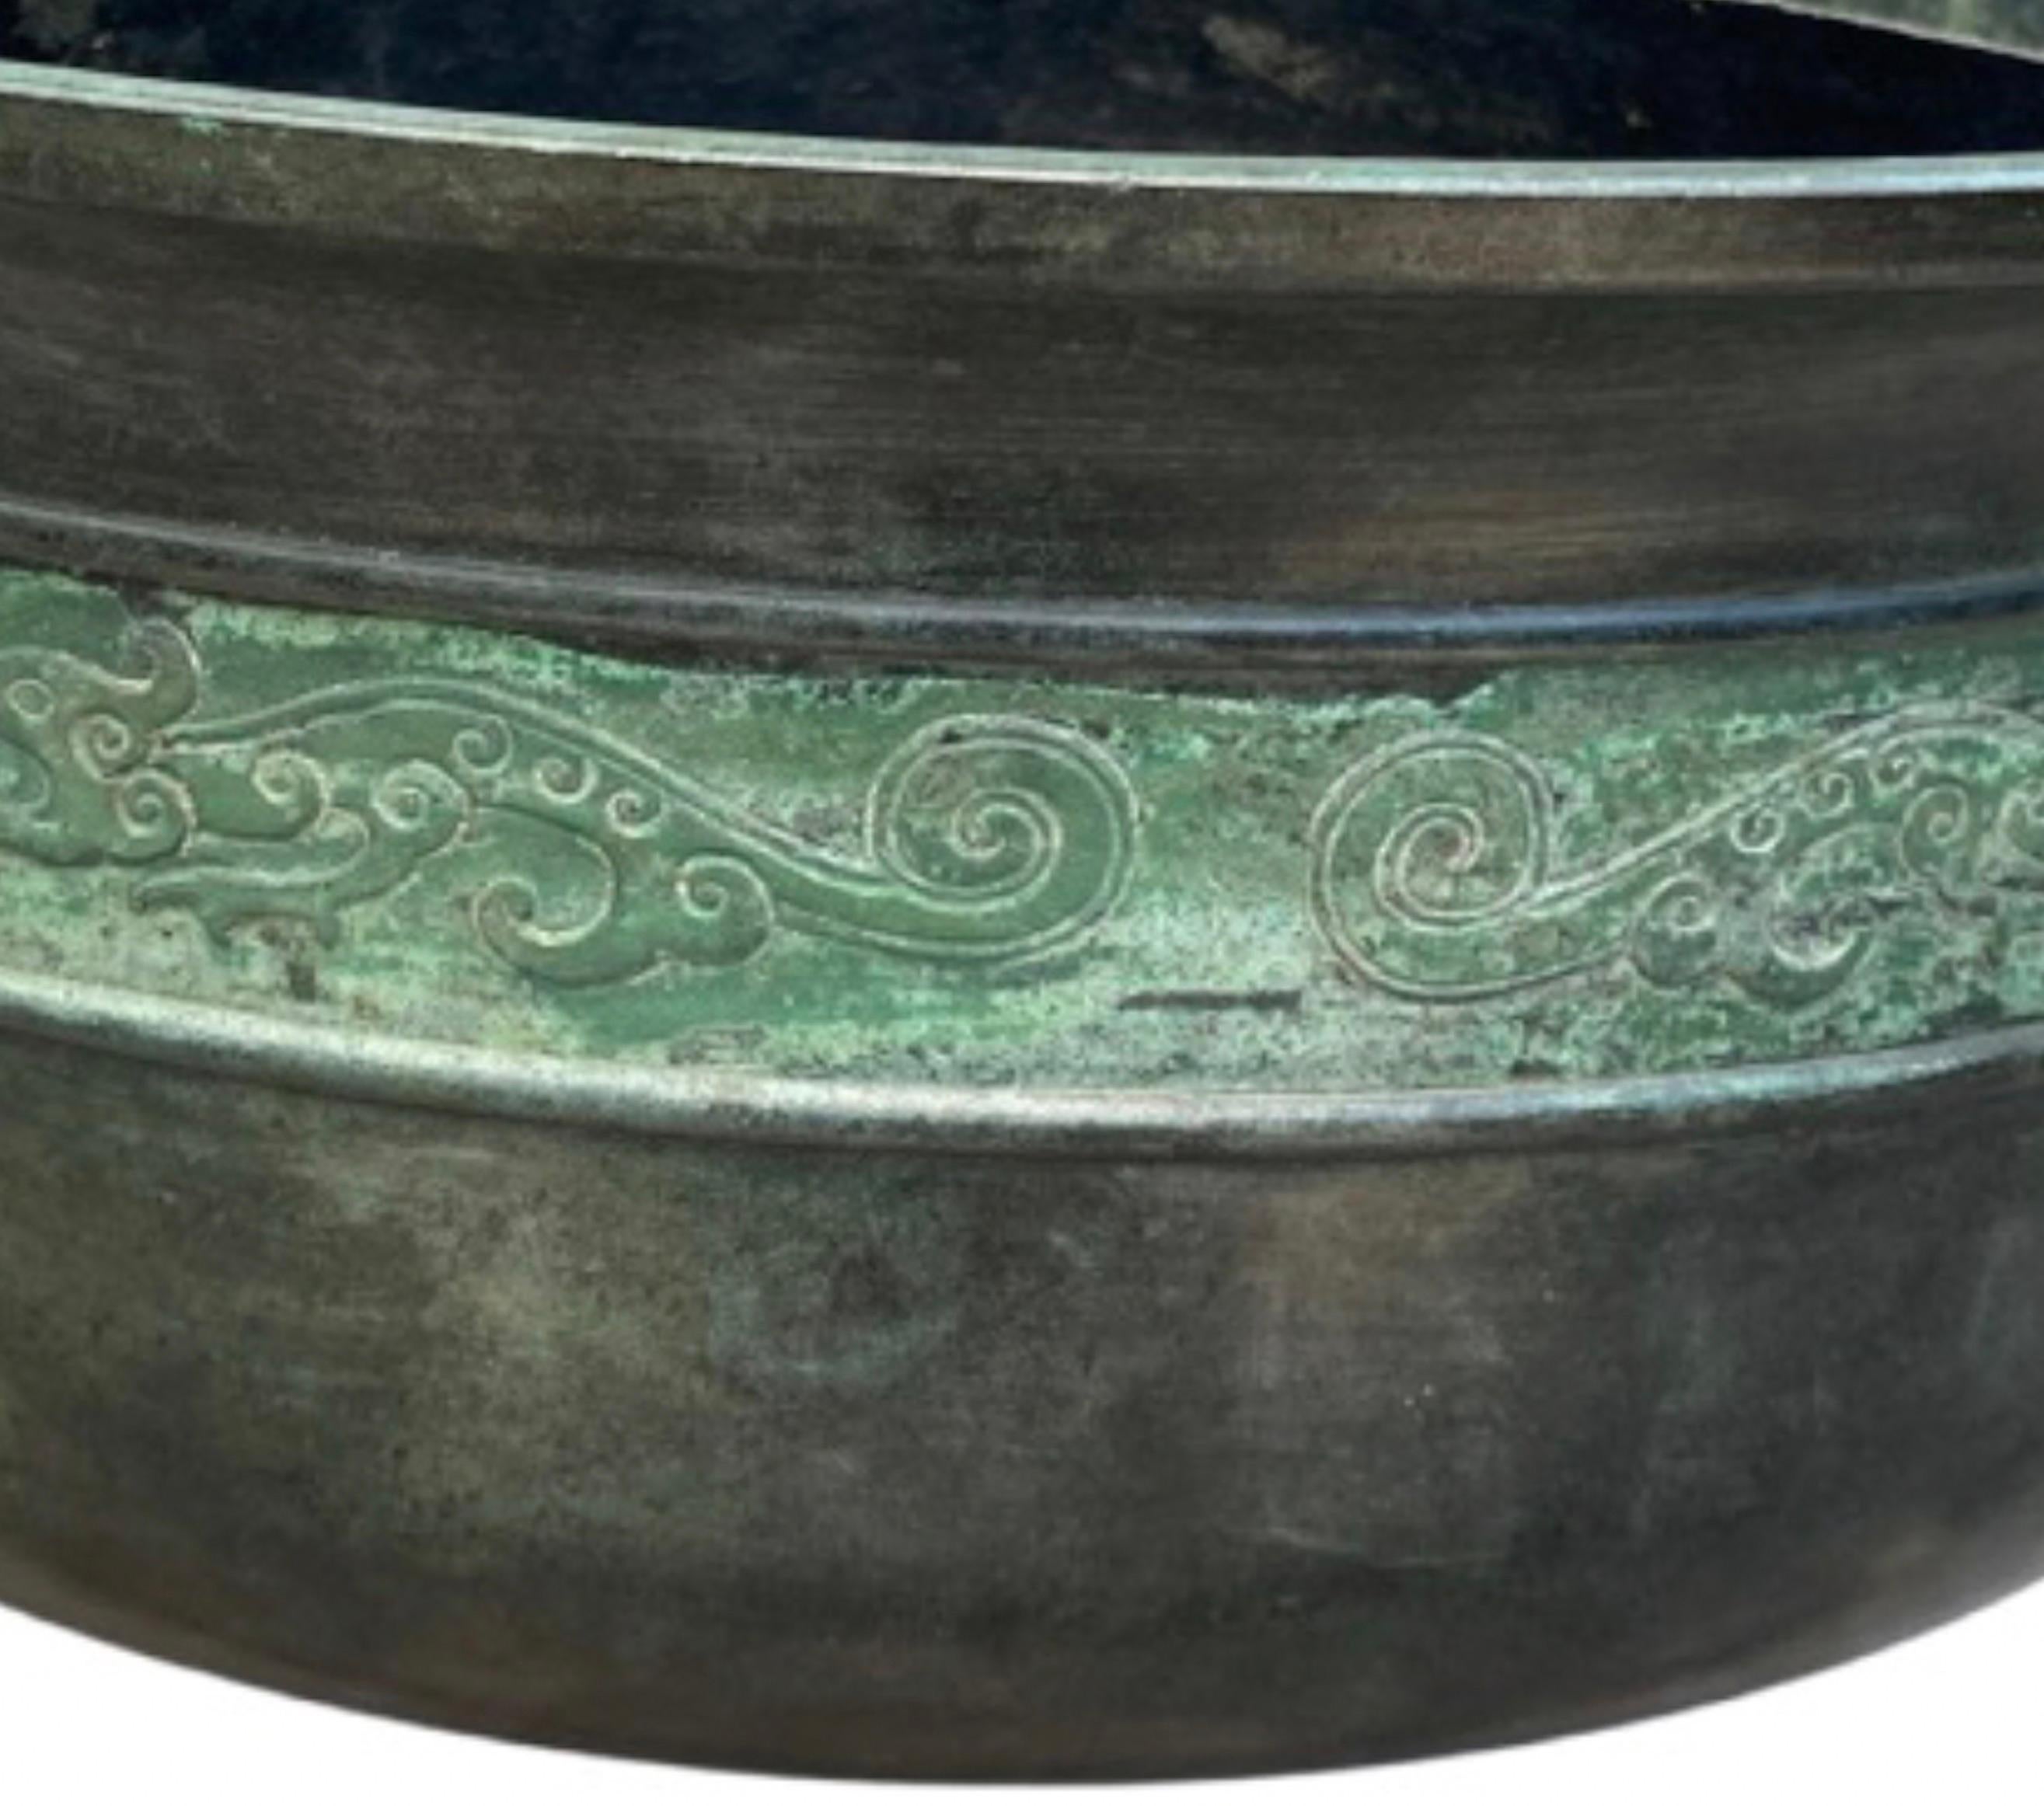 Antique Bronze Censer with Verdigris Decorative Band In Good Condition For Sale In Sag Harbor, NY